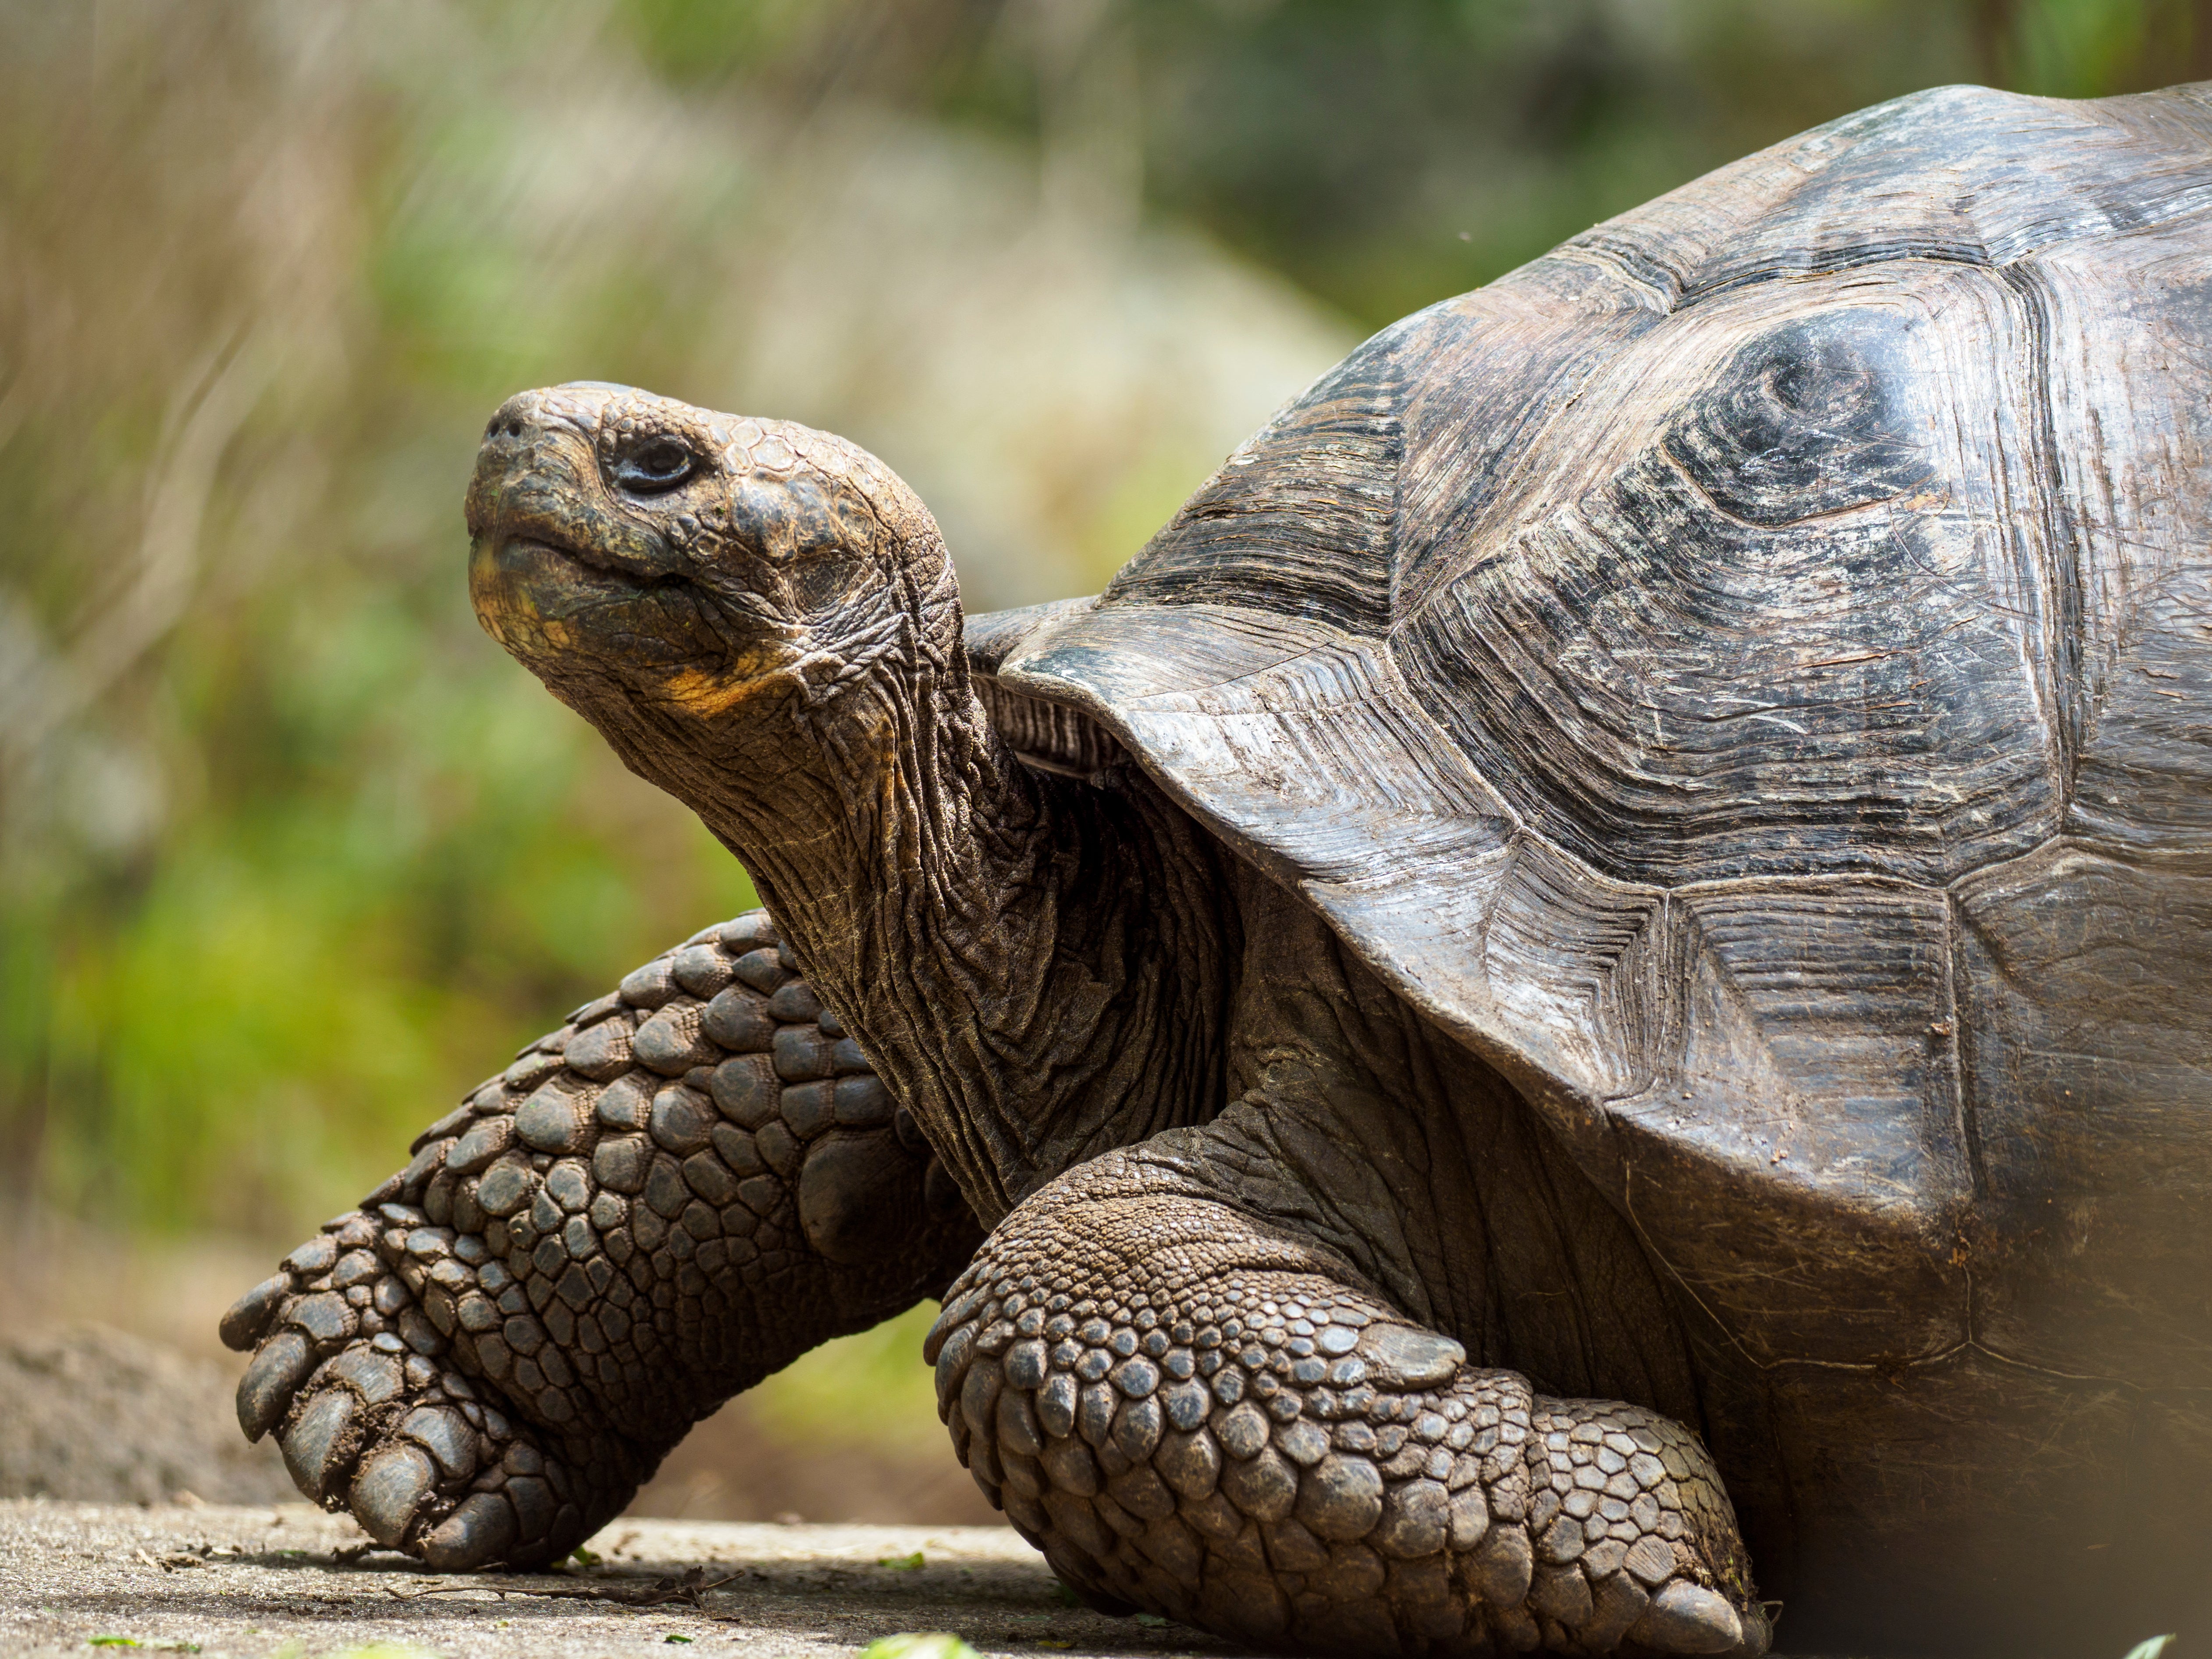 Tortoises are ‘negligibly senescent’, meaning they don’t lose ability as they get older